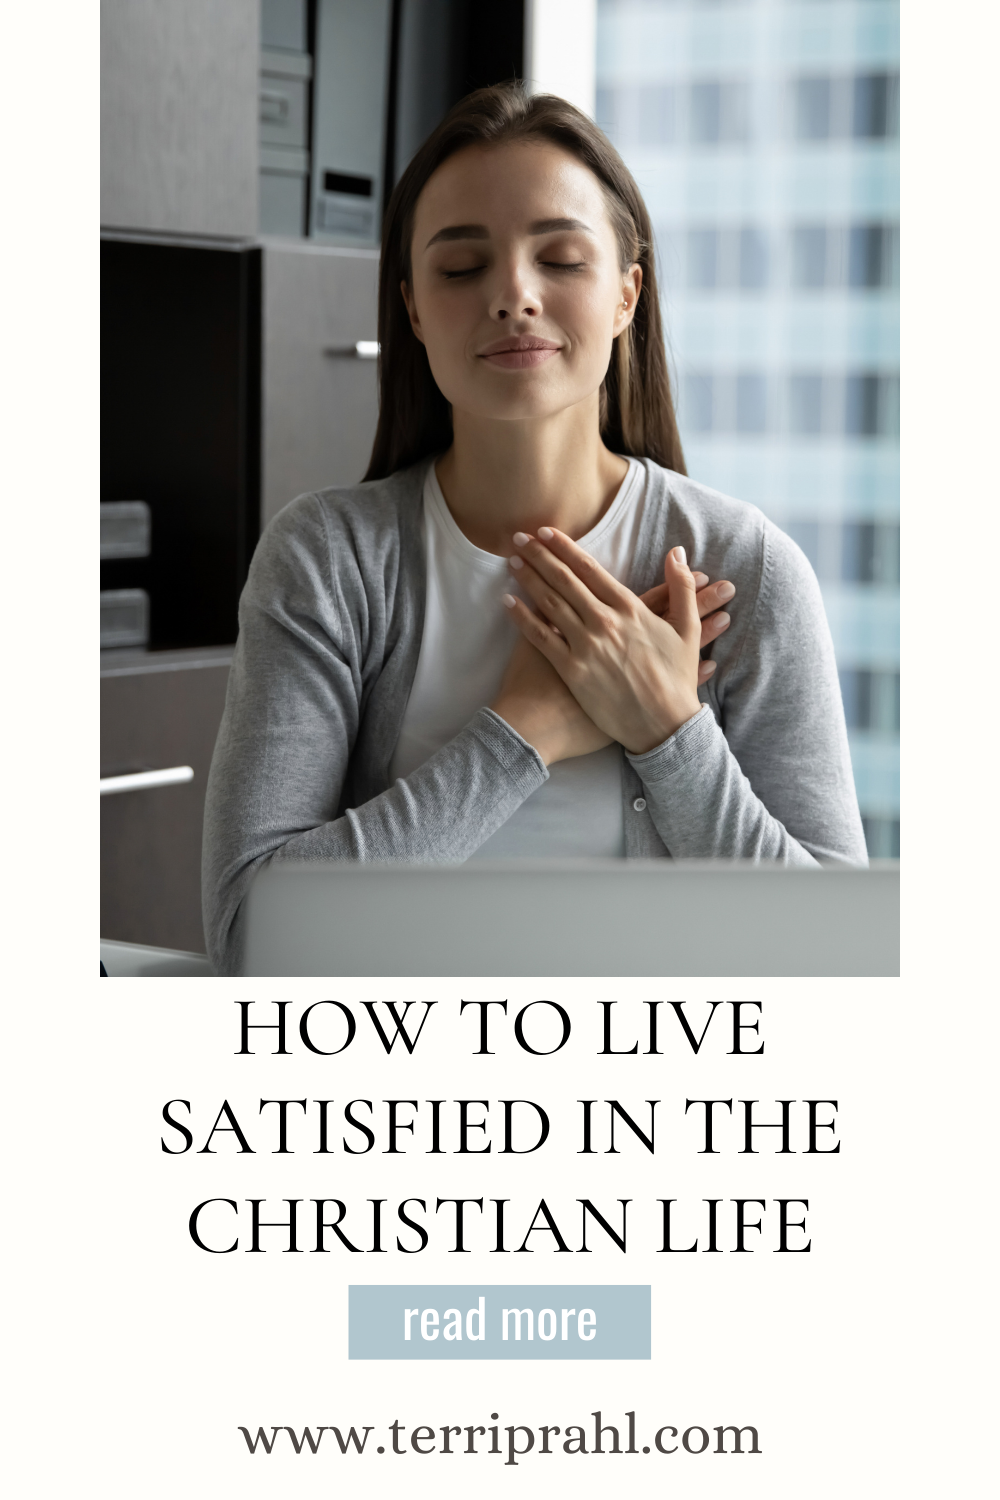 How to live satisfied